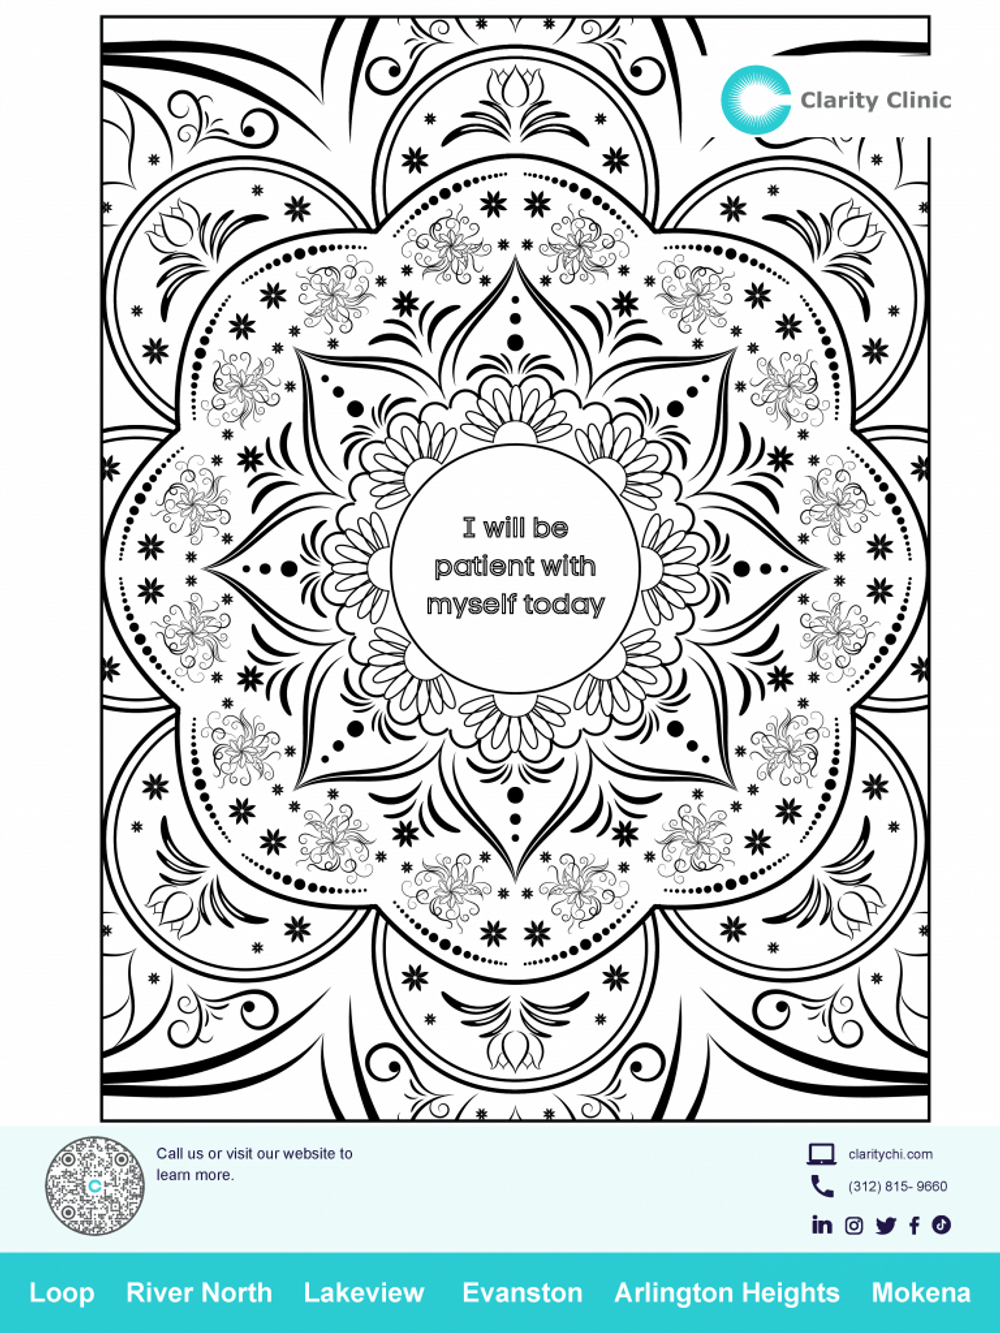 Download Coloring Pages Free From Clarity Clinic - Mental Wellness